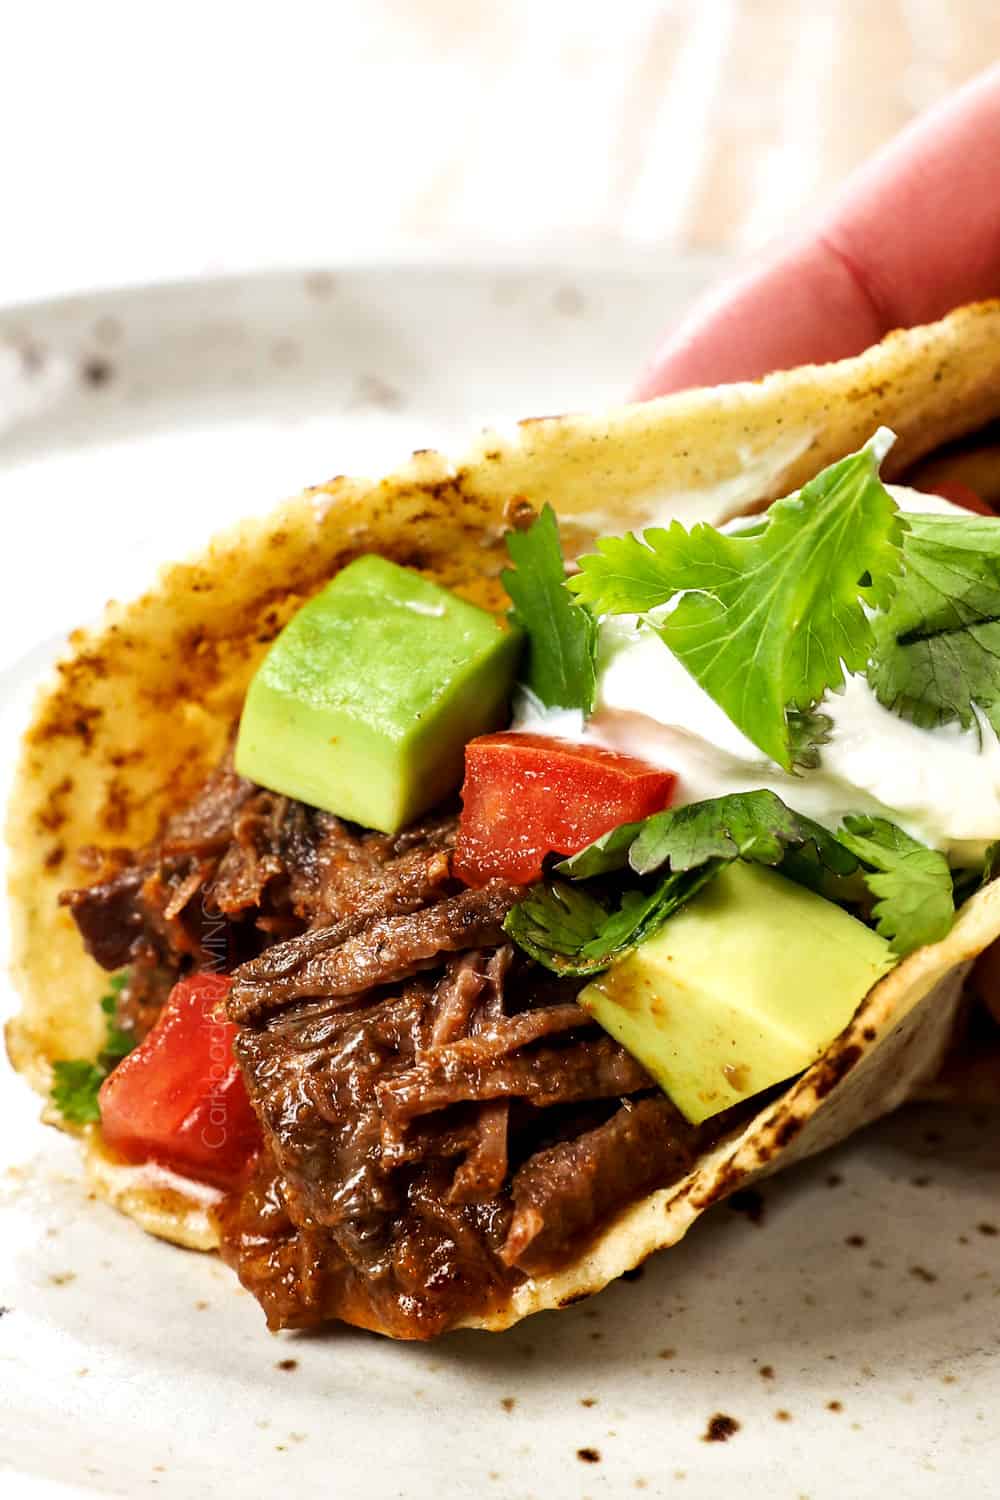 showing what to make with corn tortillas by stuffing with shredded beef, avocados, tomatoes and sour cream to make a taco